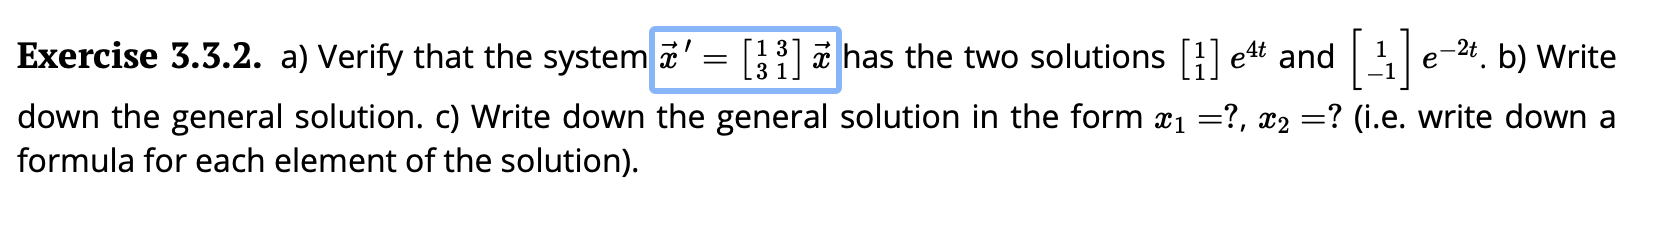 Exercise 3.3.2. a) Verify that the system =31has the two solutions e4t and 1e-2. b) Write
down the general solution. c) Write down the general solution in the form x?, x2 ? (i.e. write down a
formula for each element of the solution)
